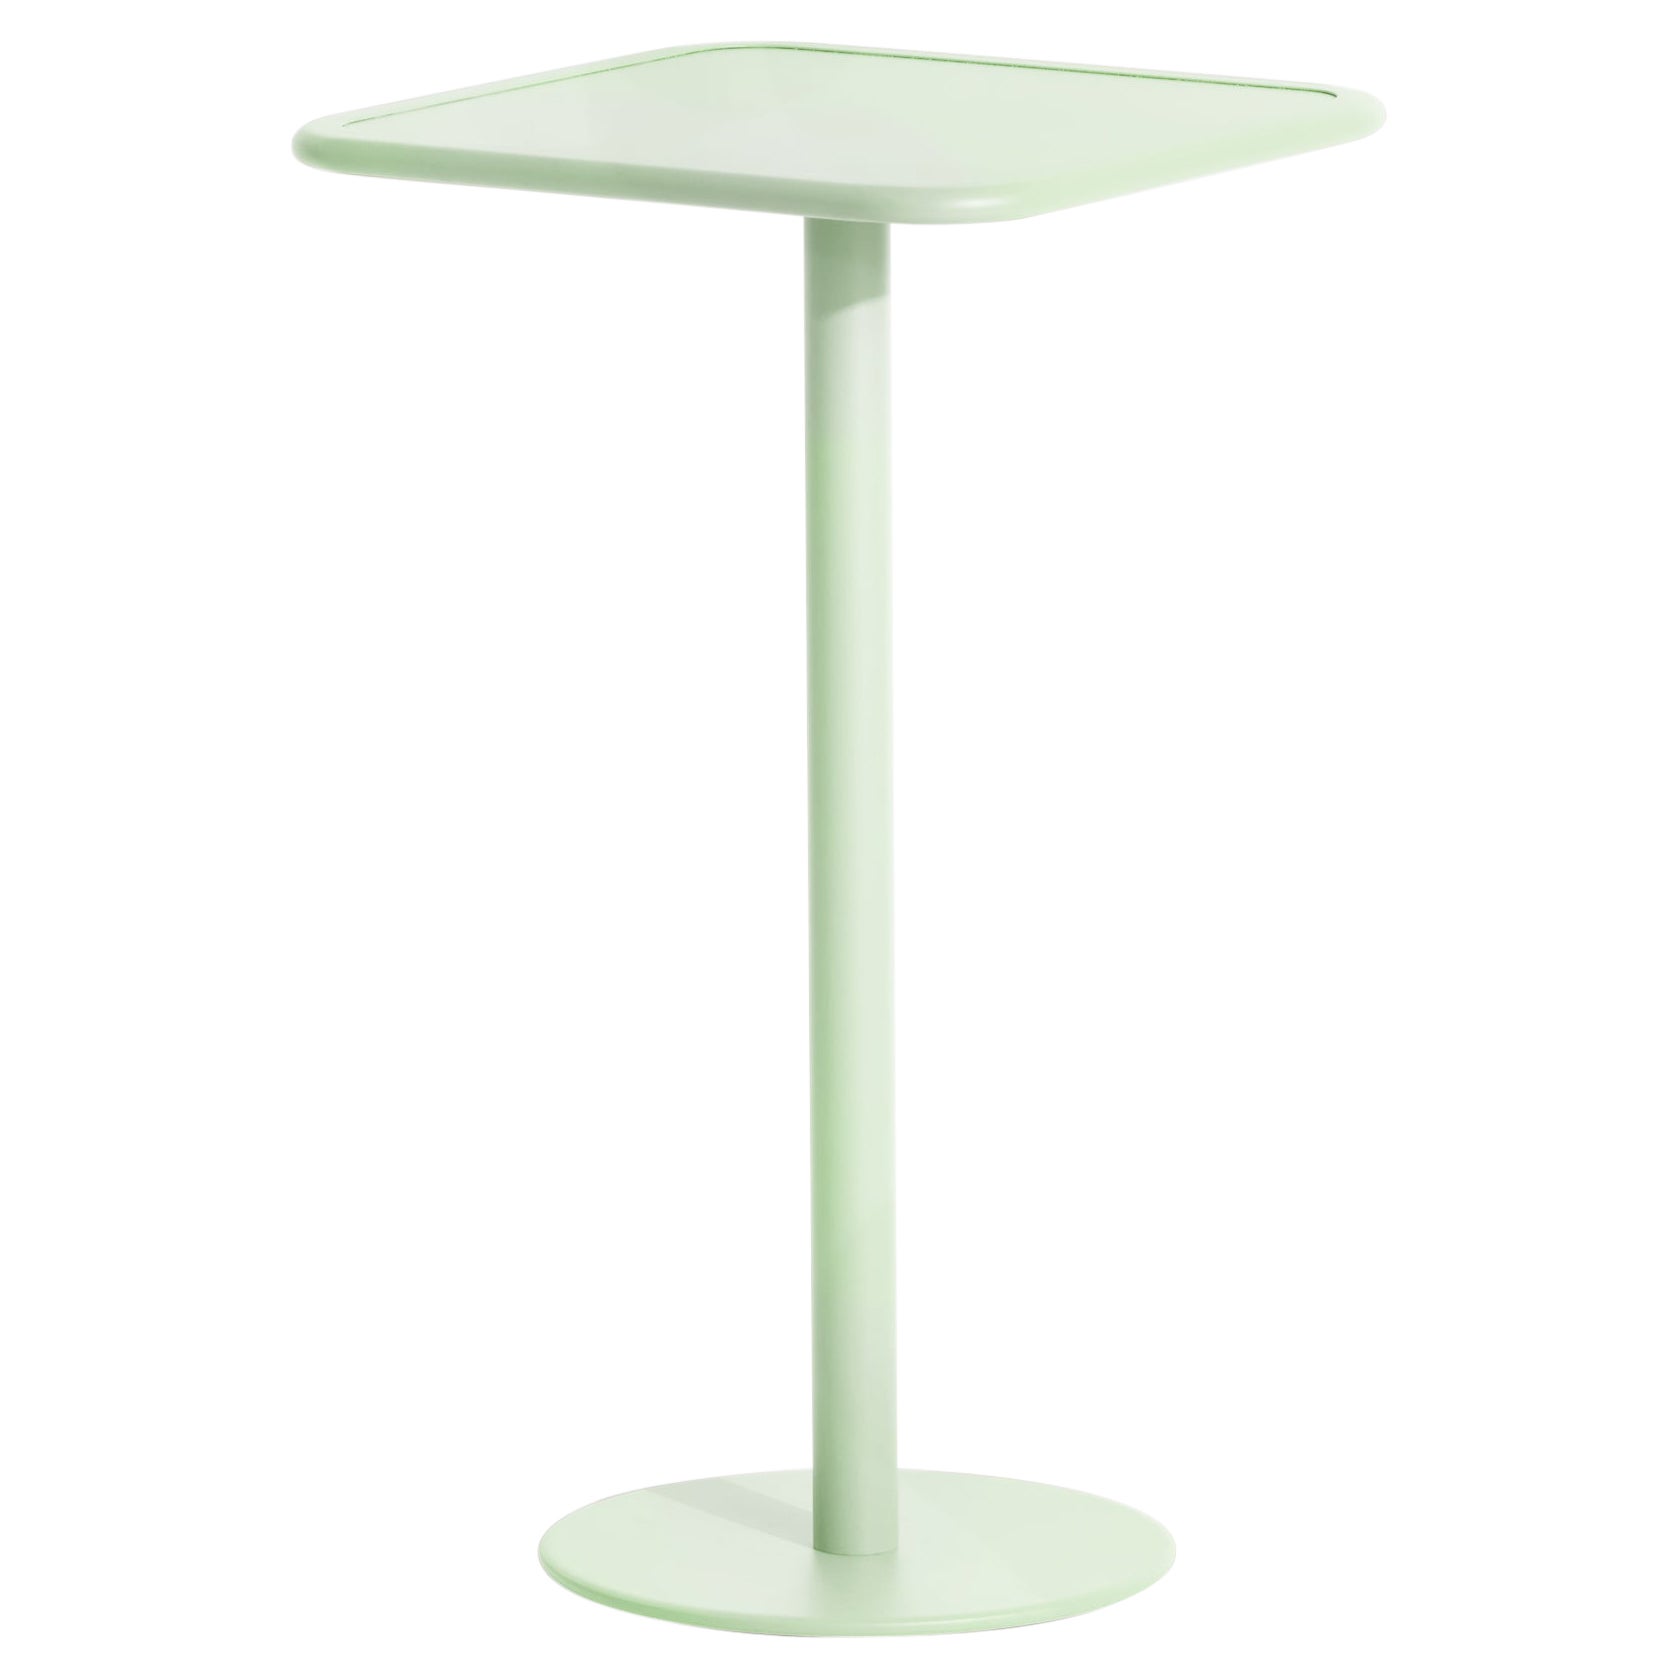 Petite Friture Week-End Square High Table in Pastel Green Aluminium, 2017 For Sale